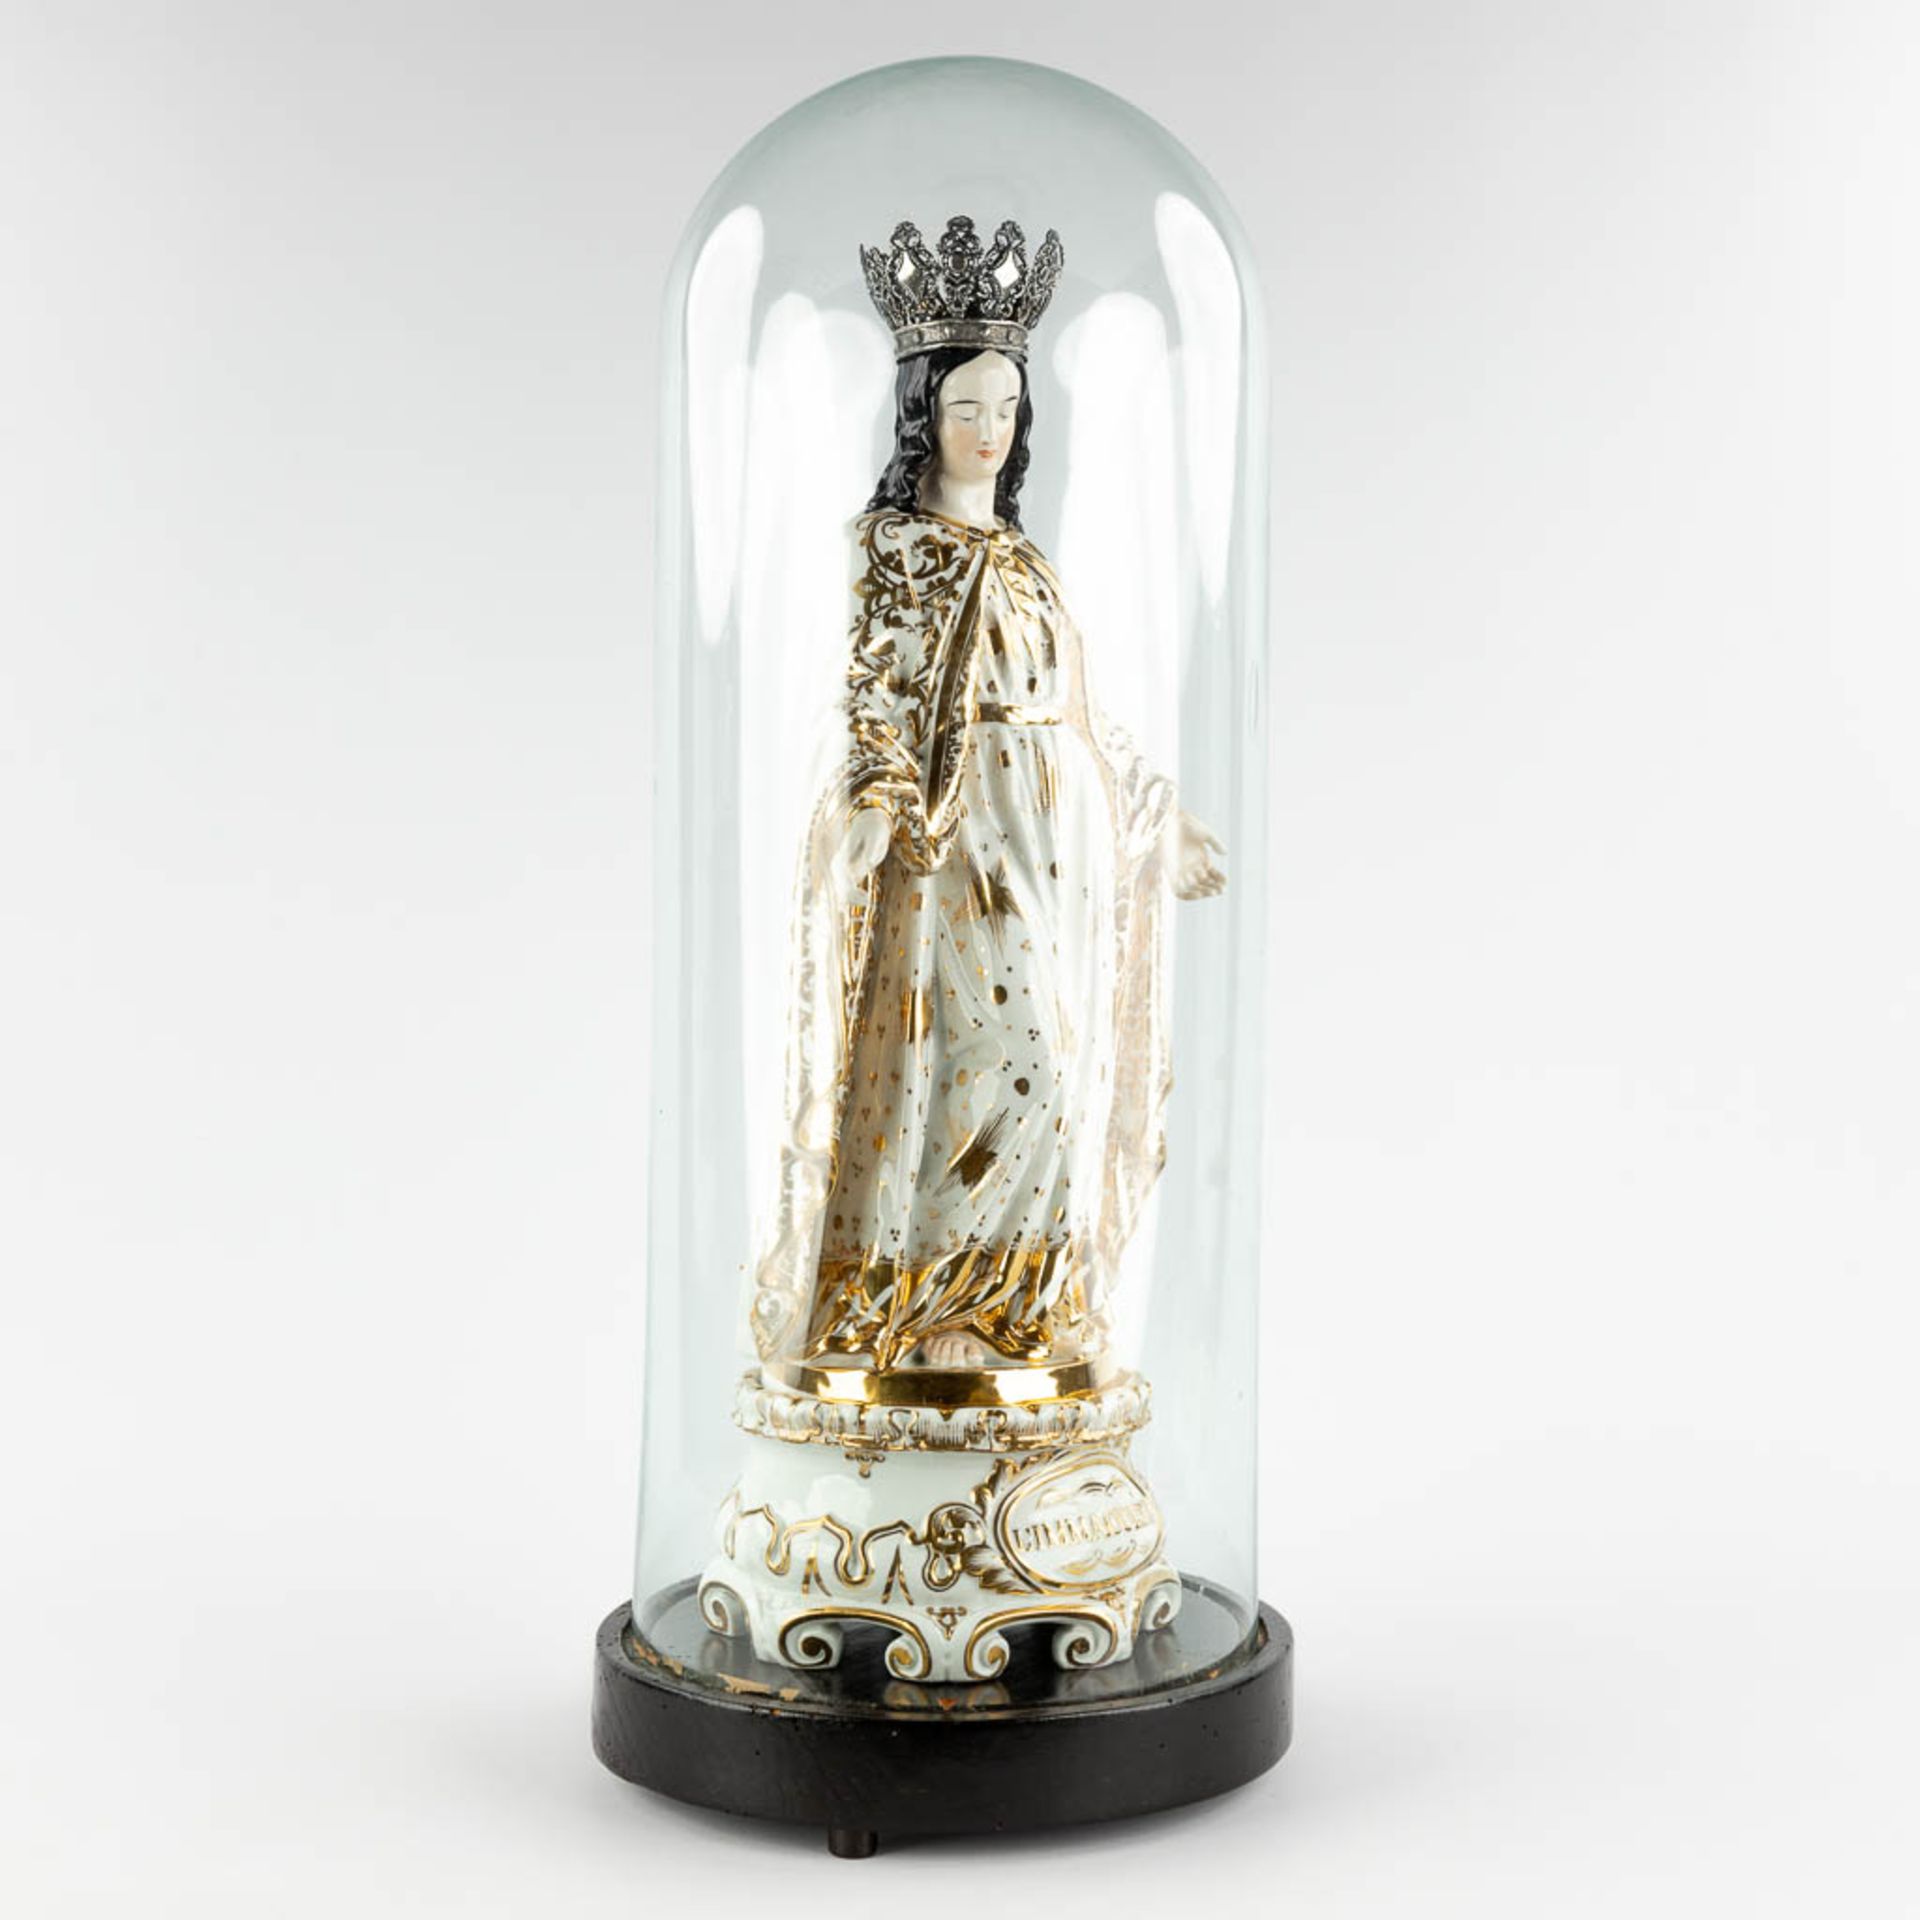 a large figurine of Madonna standing under a glass dome. Vieux Bruxelles porcelain. 19th C. (W:23 x - Image 3 of 11